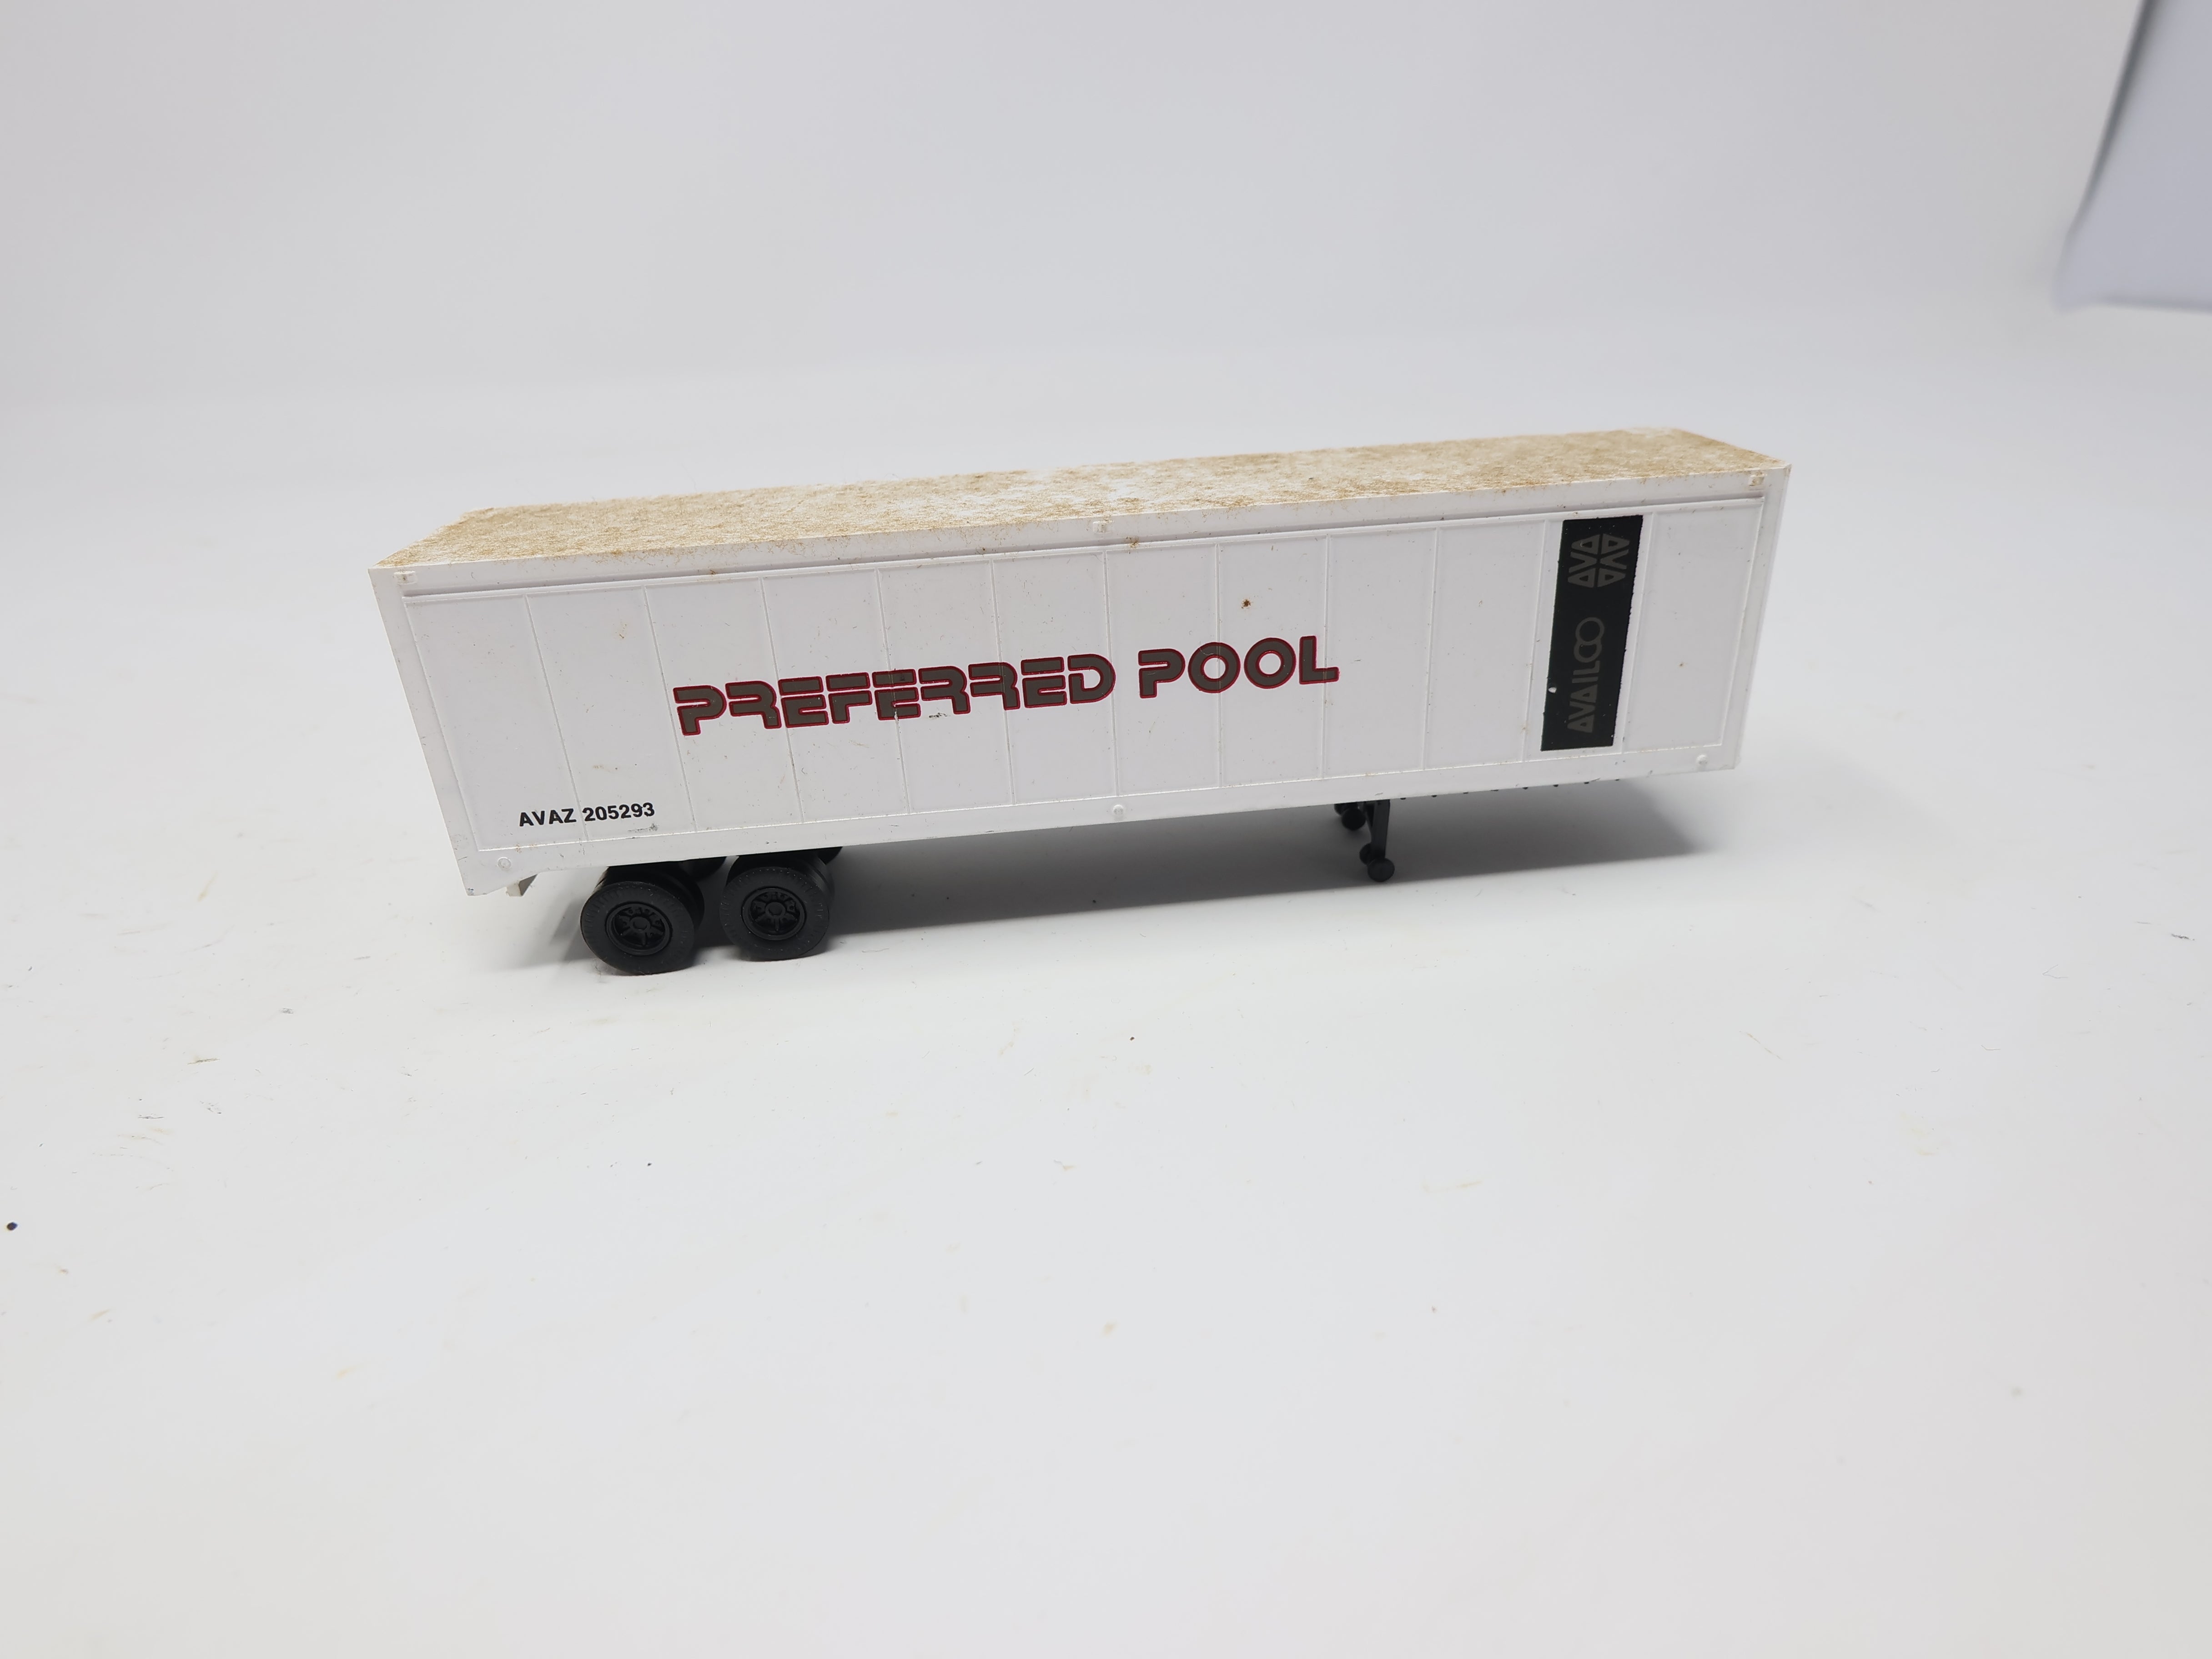 USED Walthers , 40' Trailer, Preferred Pool AVAZ #205293